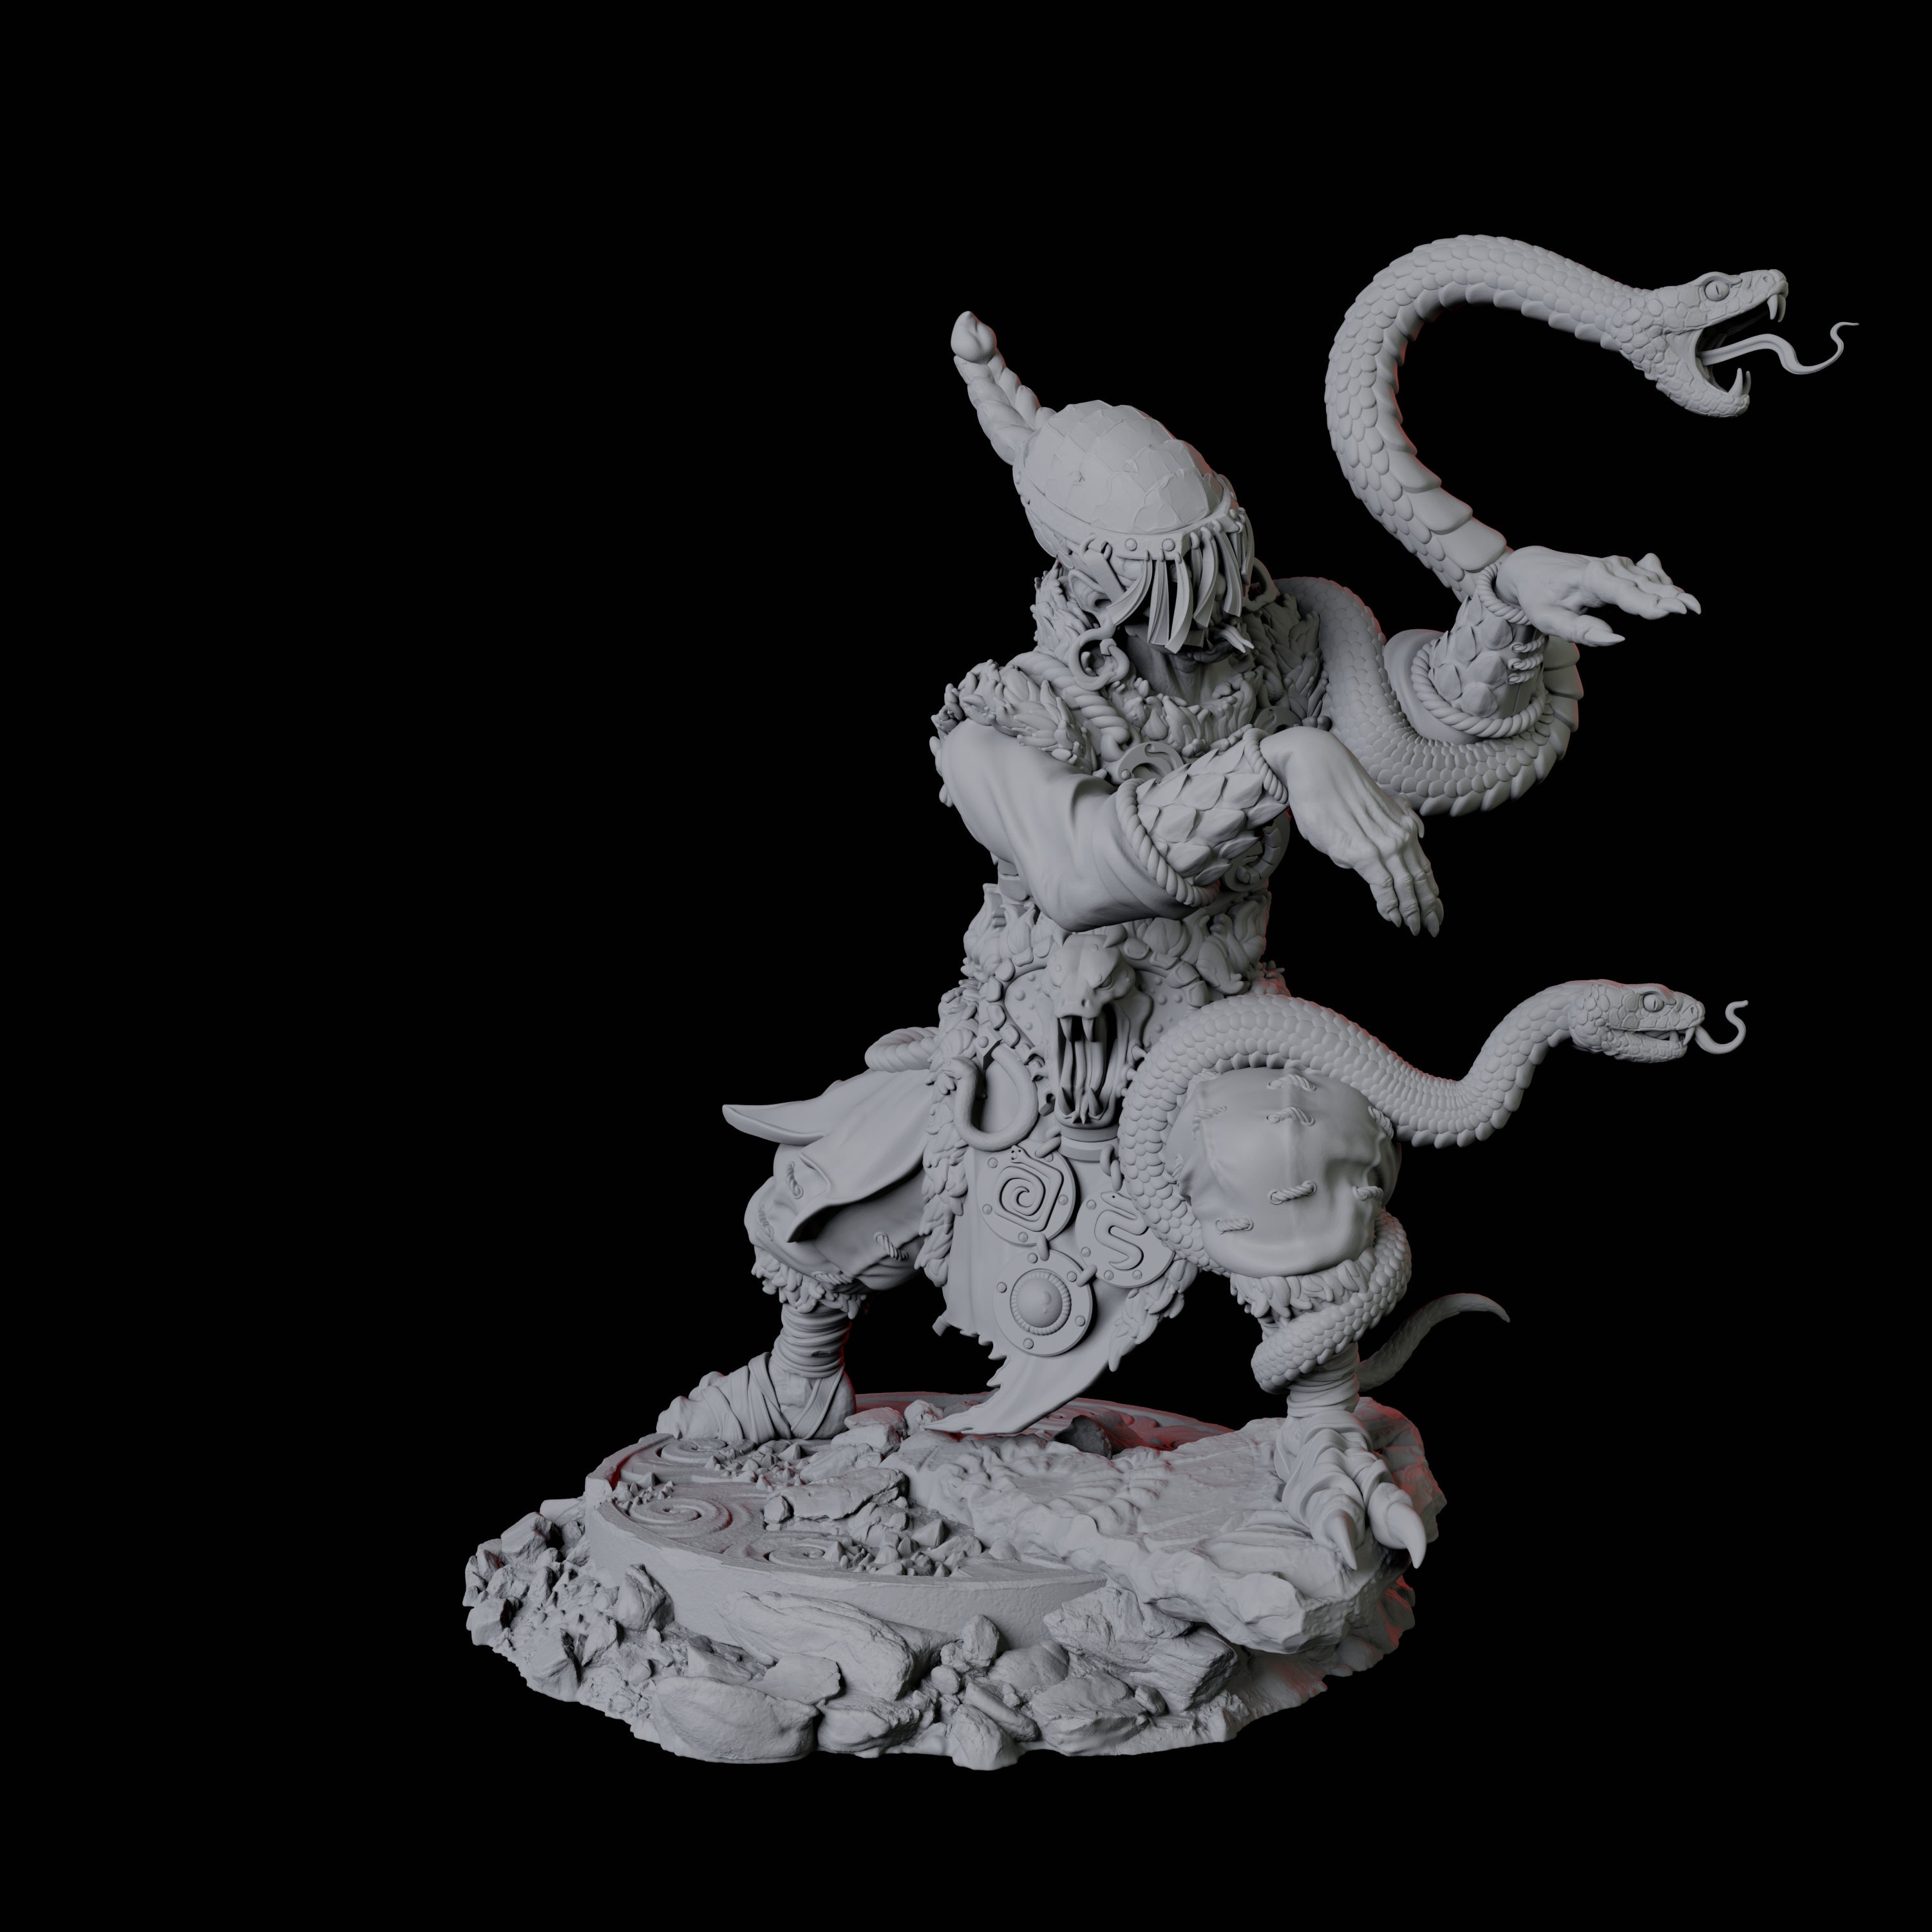 Yuan-Ti Snake Charmer A Miniature for Dungeons and Dragons, Pathfinder or other TTRPGs